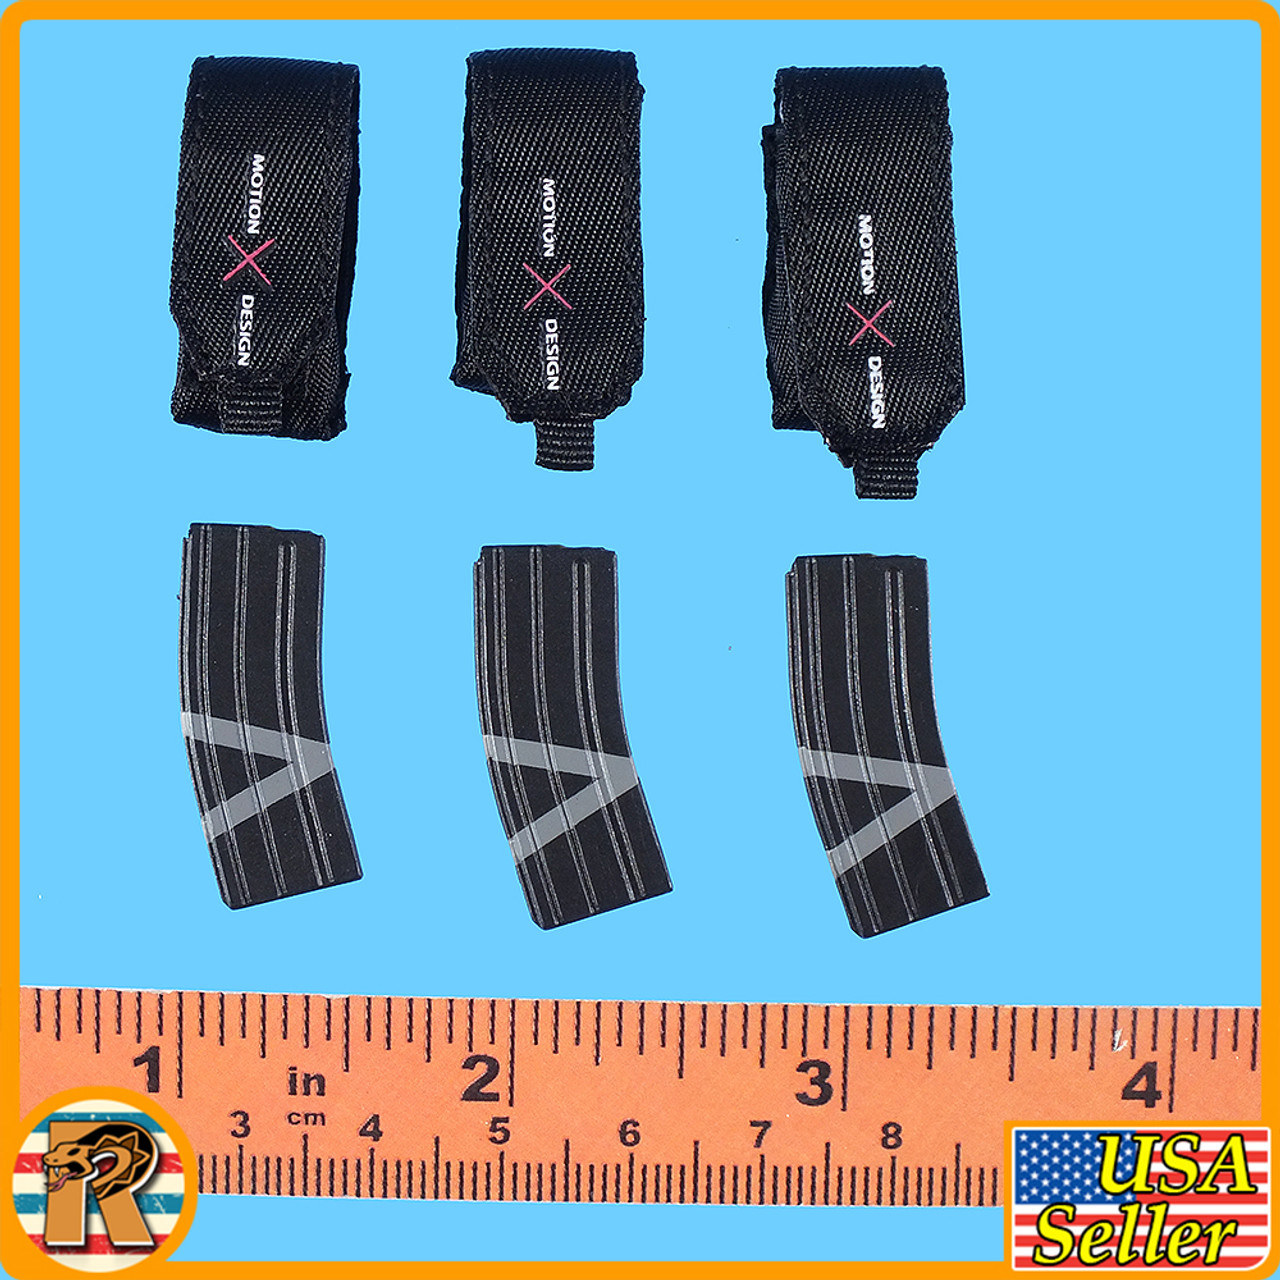 Yulia Frontline Maid - Rifle Mags & Pouches - 1/6 Scale -